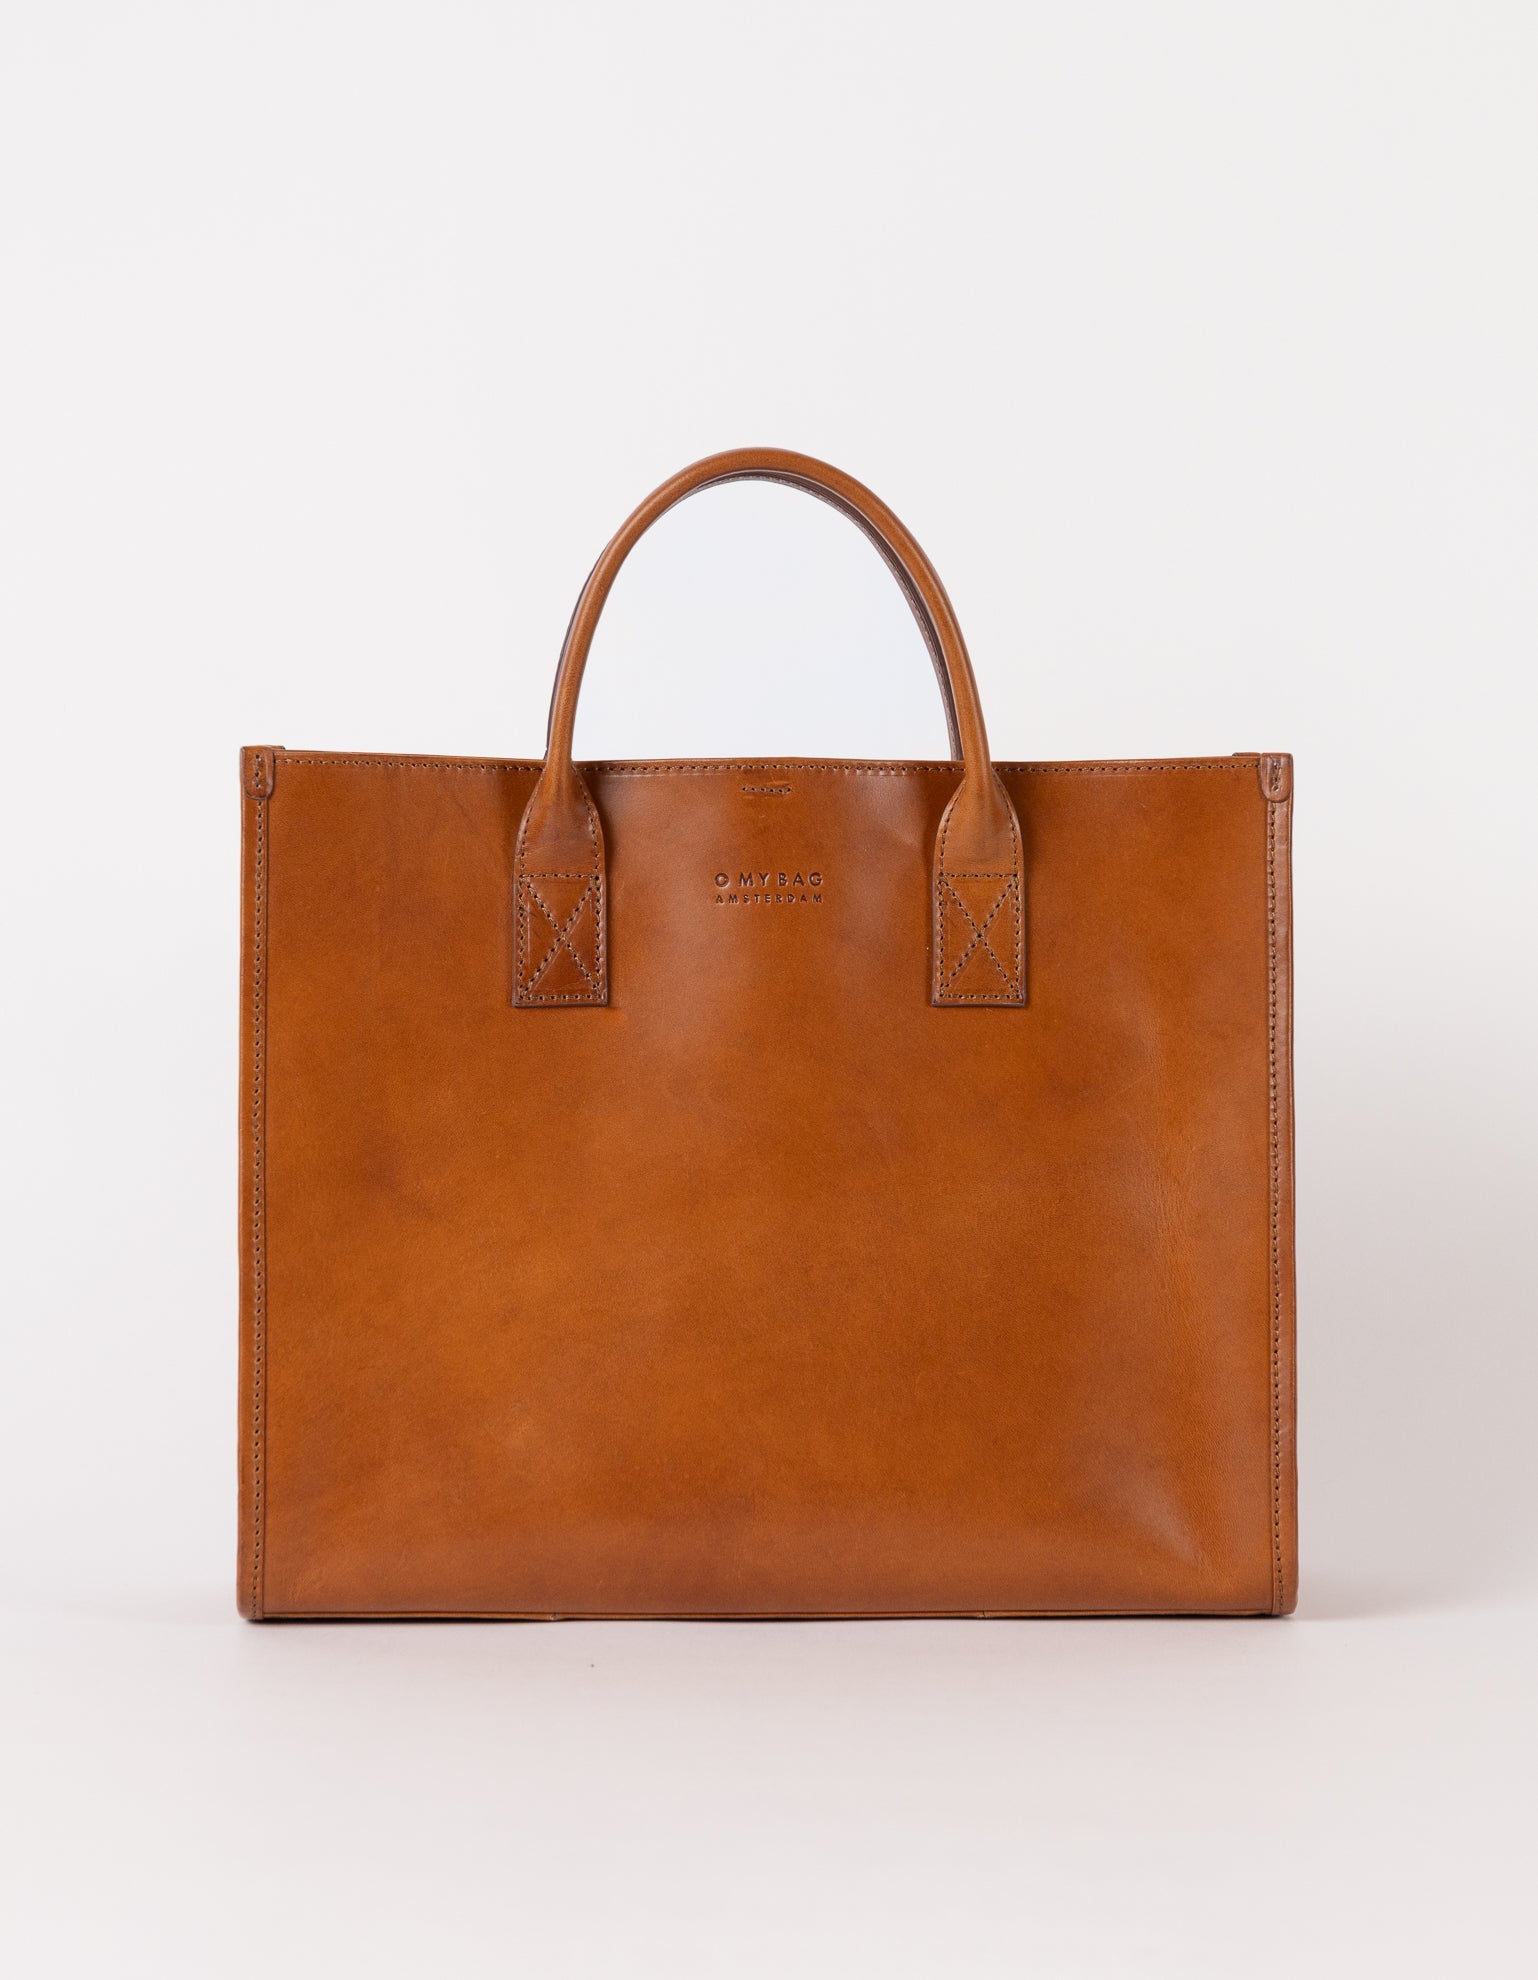 Rectangle shaped leather tote bag - front product image without strap